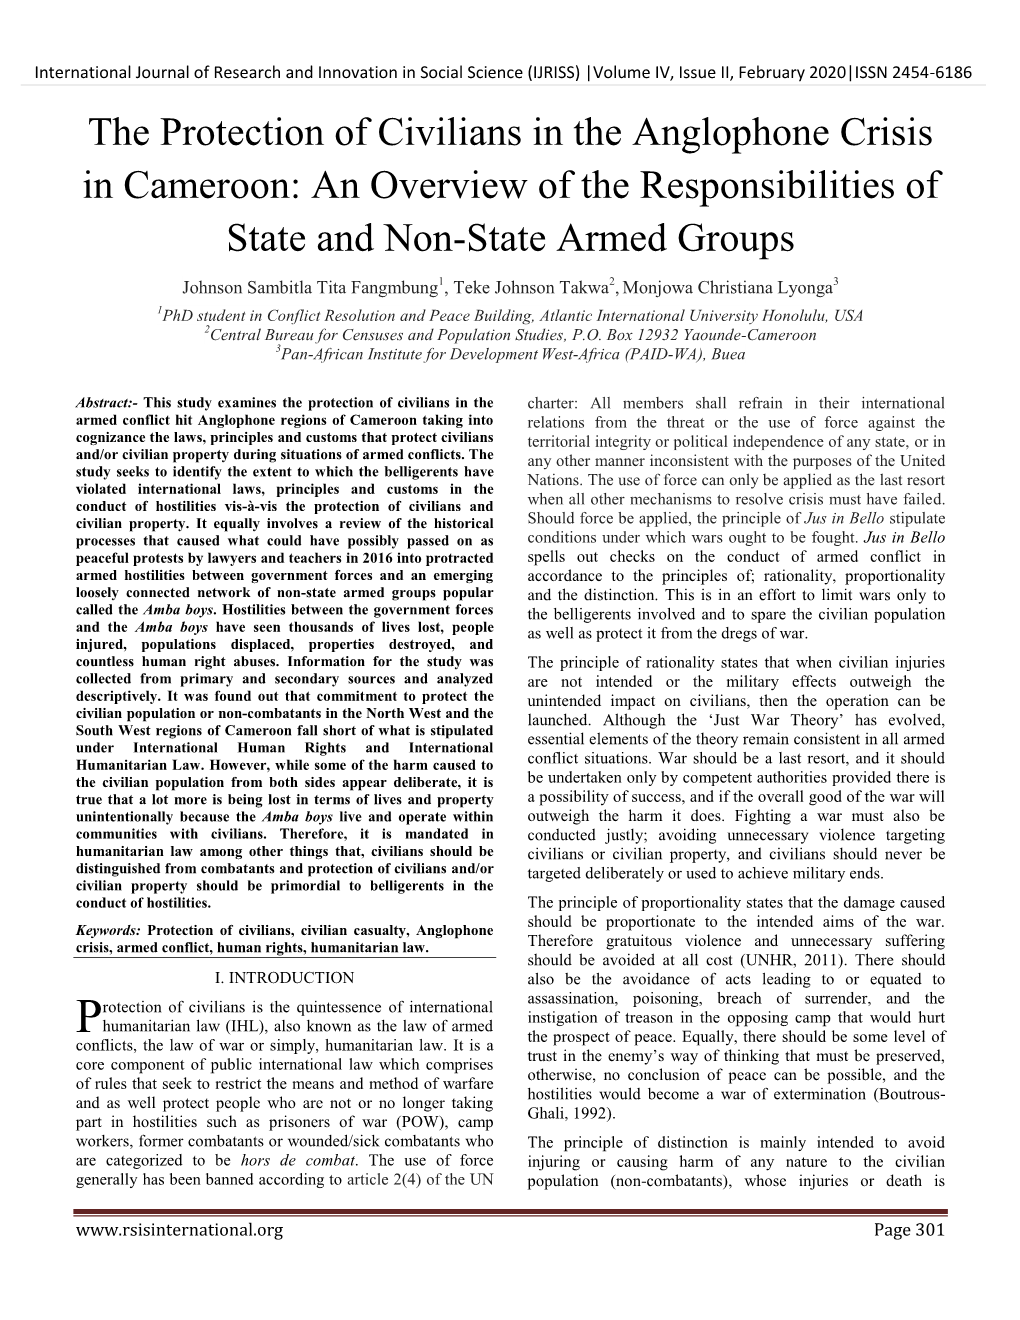 The Protection of Civilians in the Anglophone Crisis in Cameroon: an Overview of the Responsibilities of State and Non-State Armed Groups